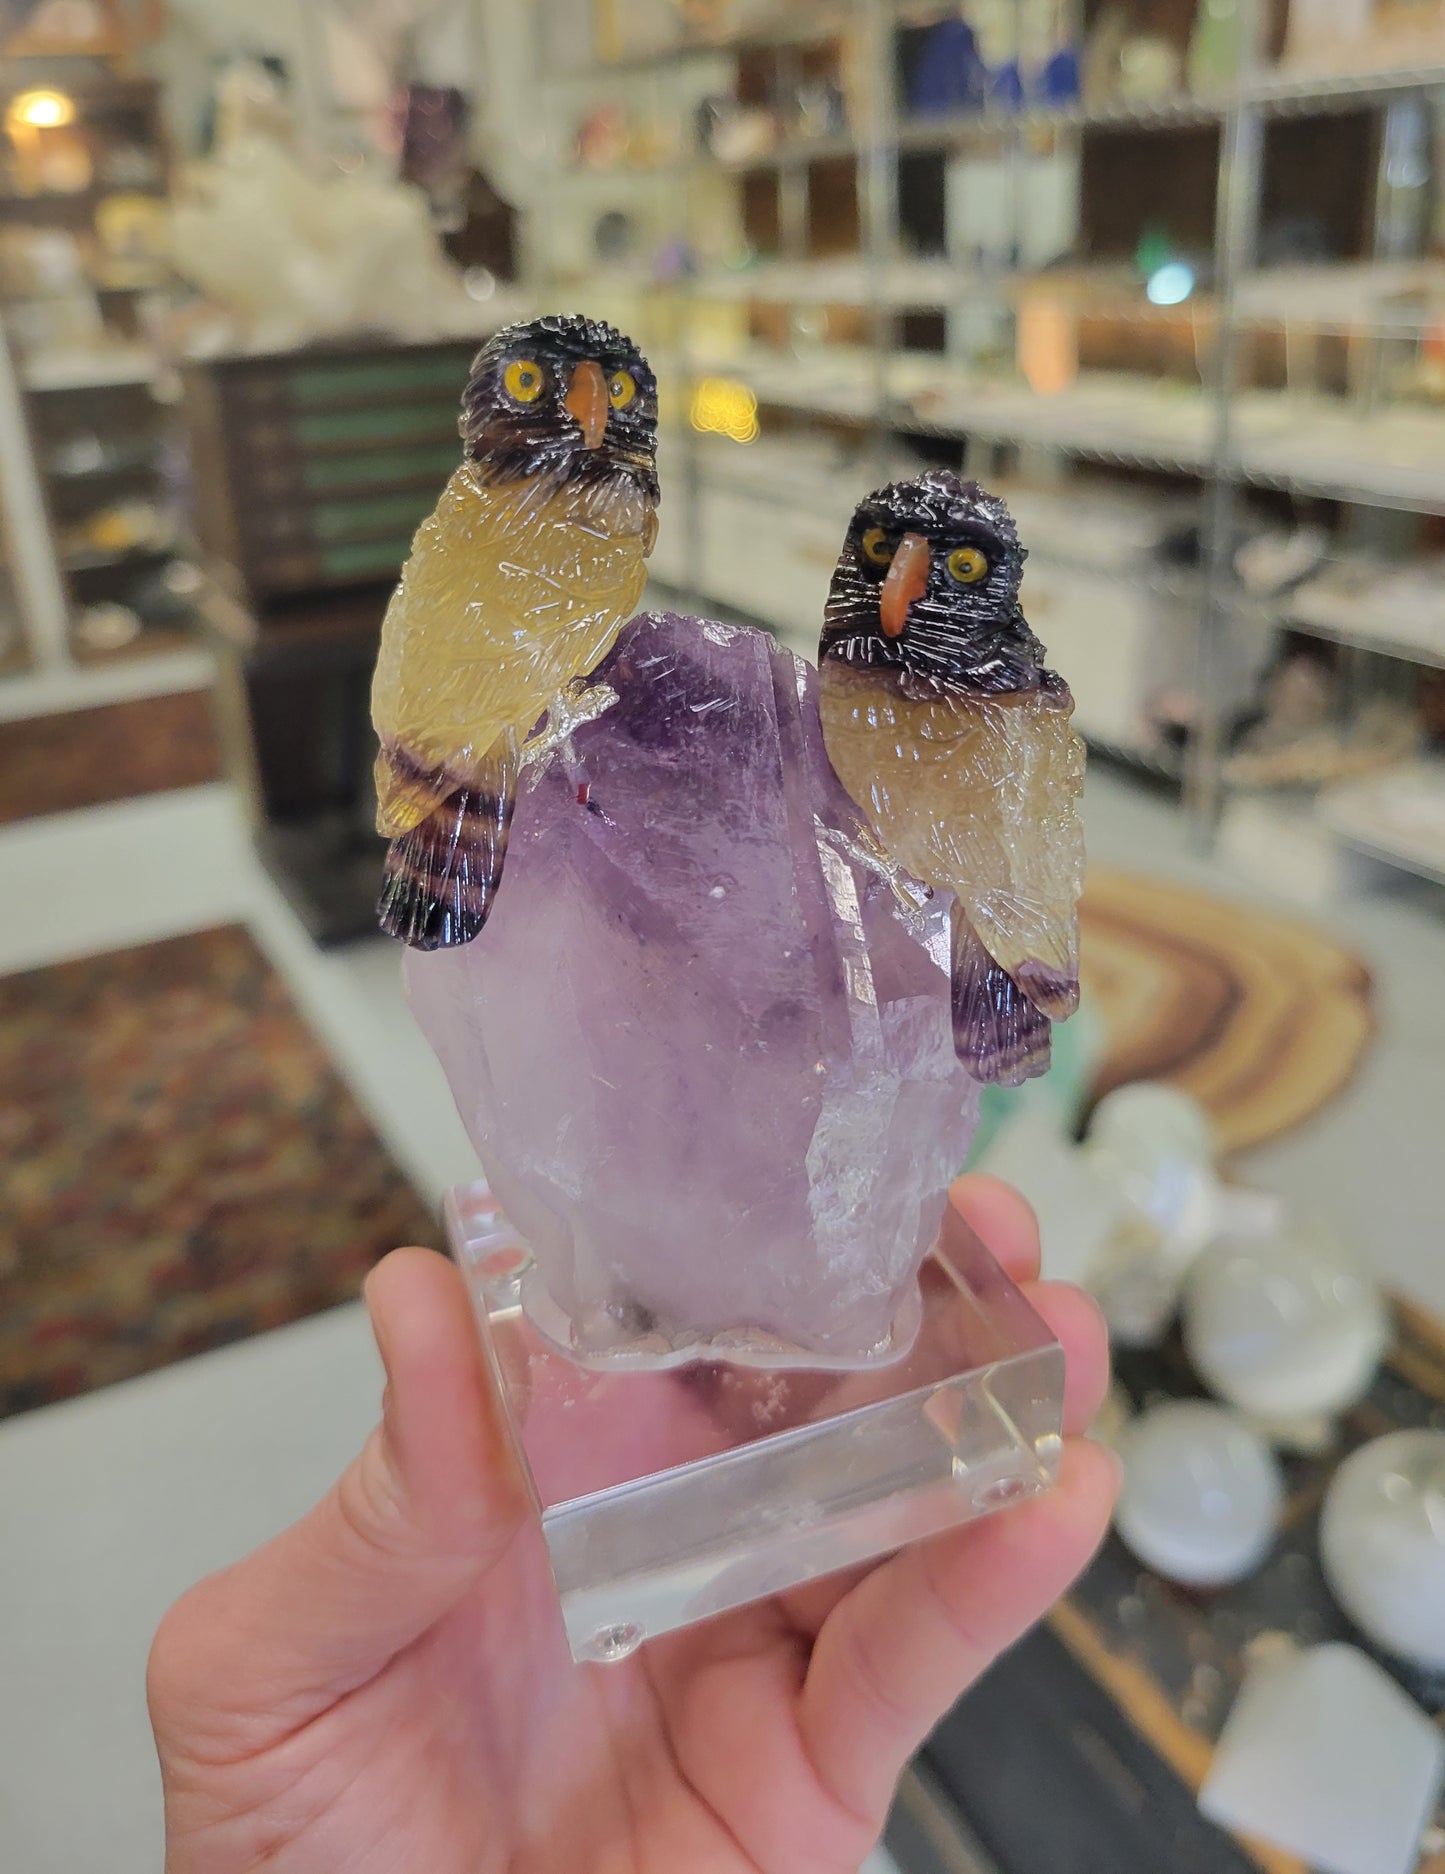 Peter Muller Collection, Rainbow Fluorite Owls on Amethyst Carving